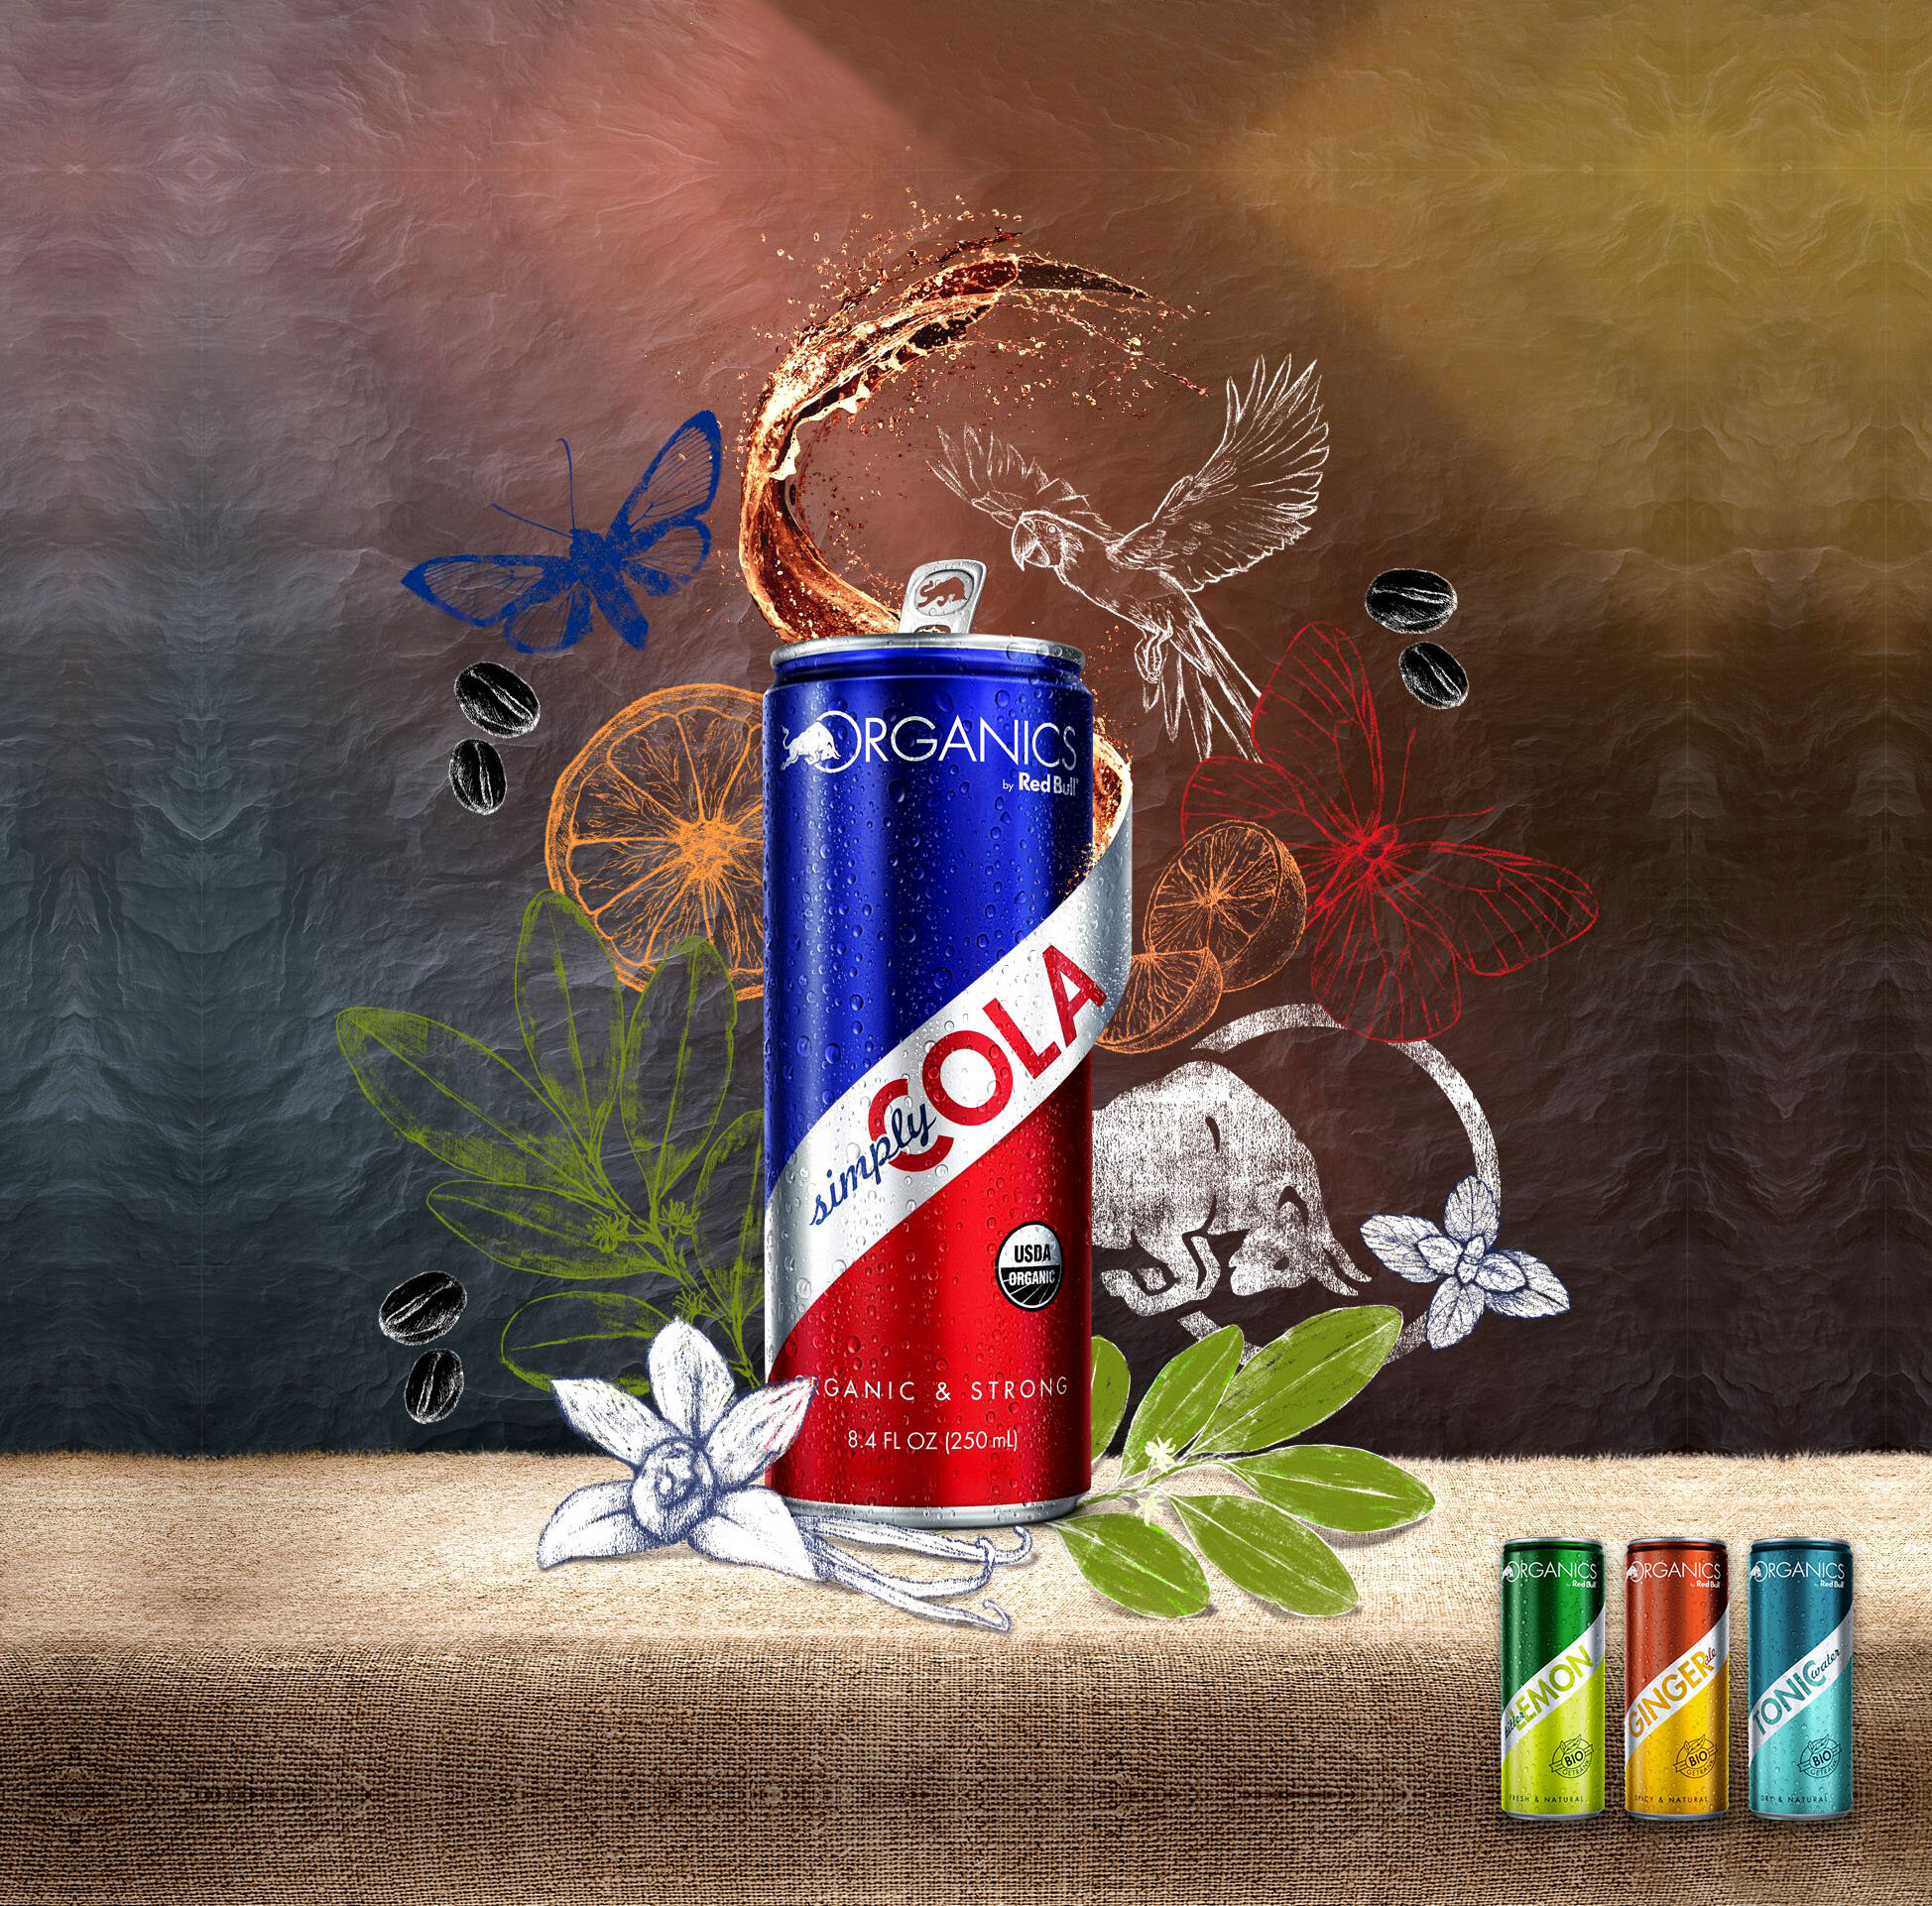 Red bull mobile. Organics by Red bull. Ред Булл кола. Red bull Organics 250 ml. Organic Cola Red bull.